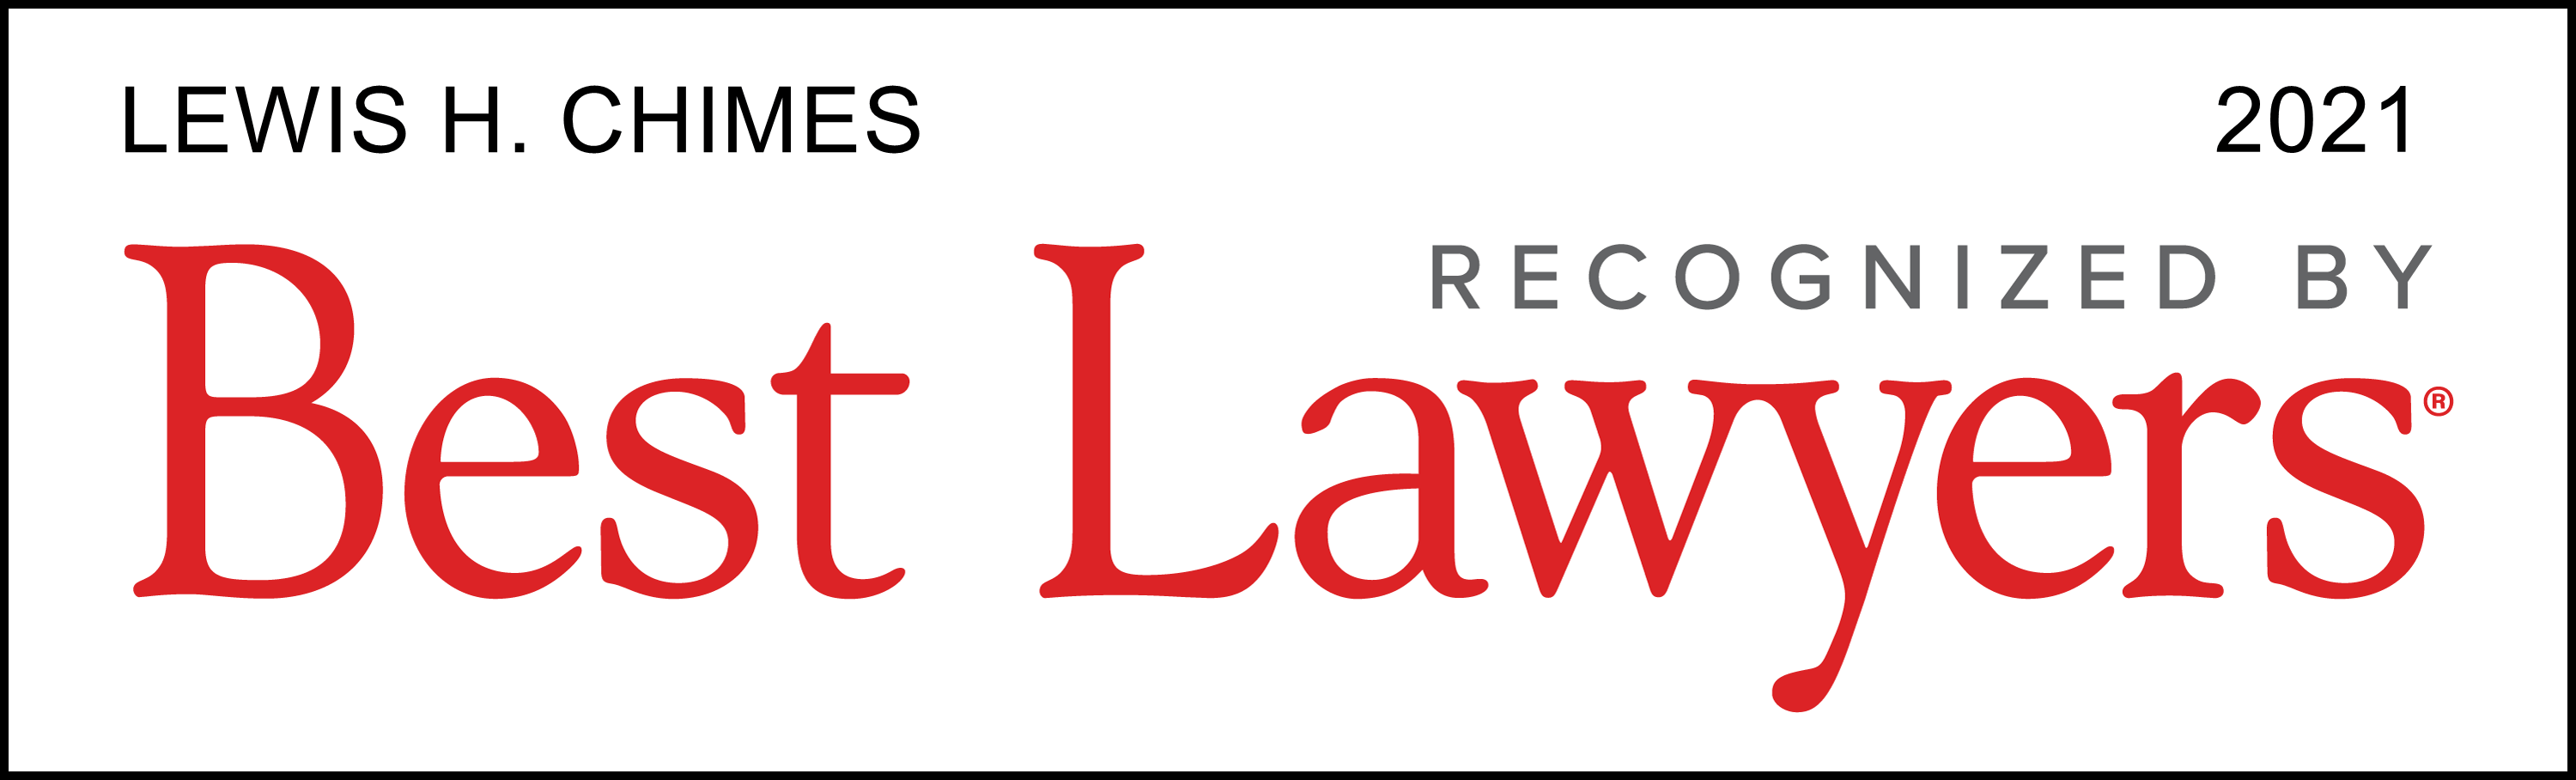 Lewis H. Chimes 2021 Recognized By Best Lawyers